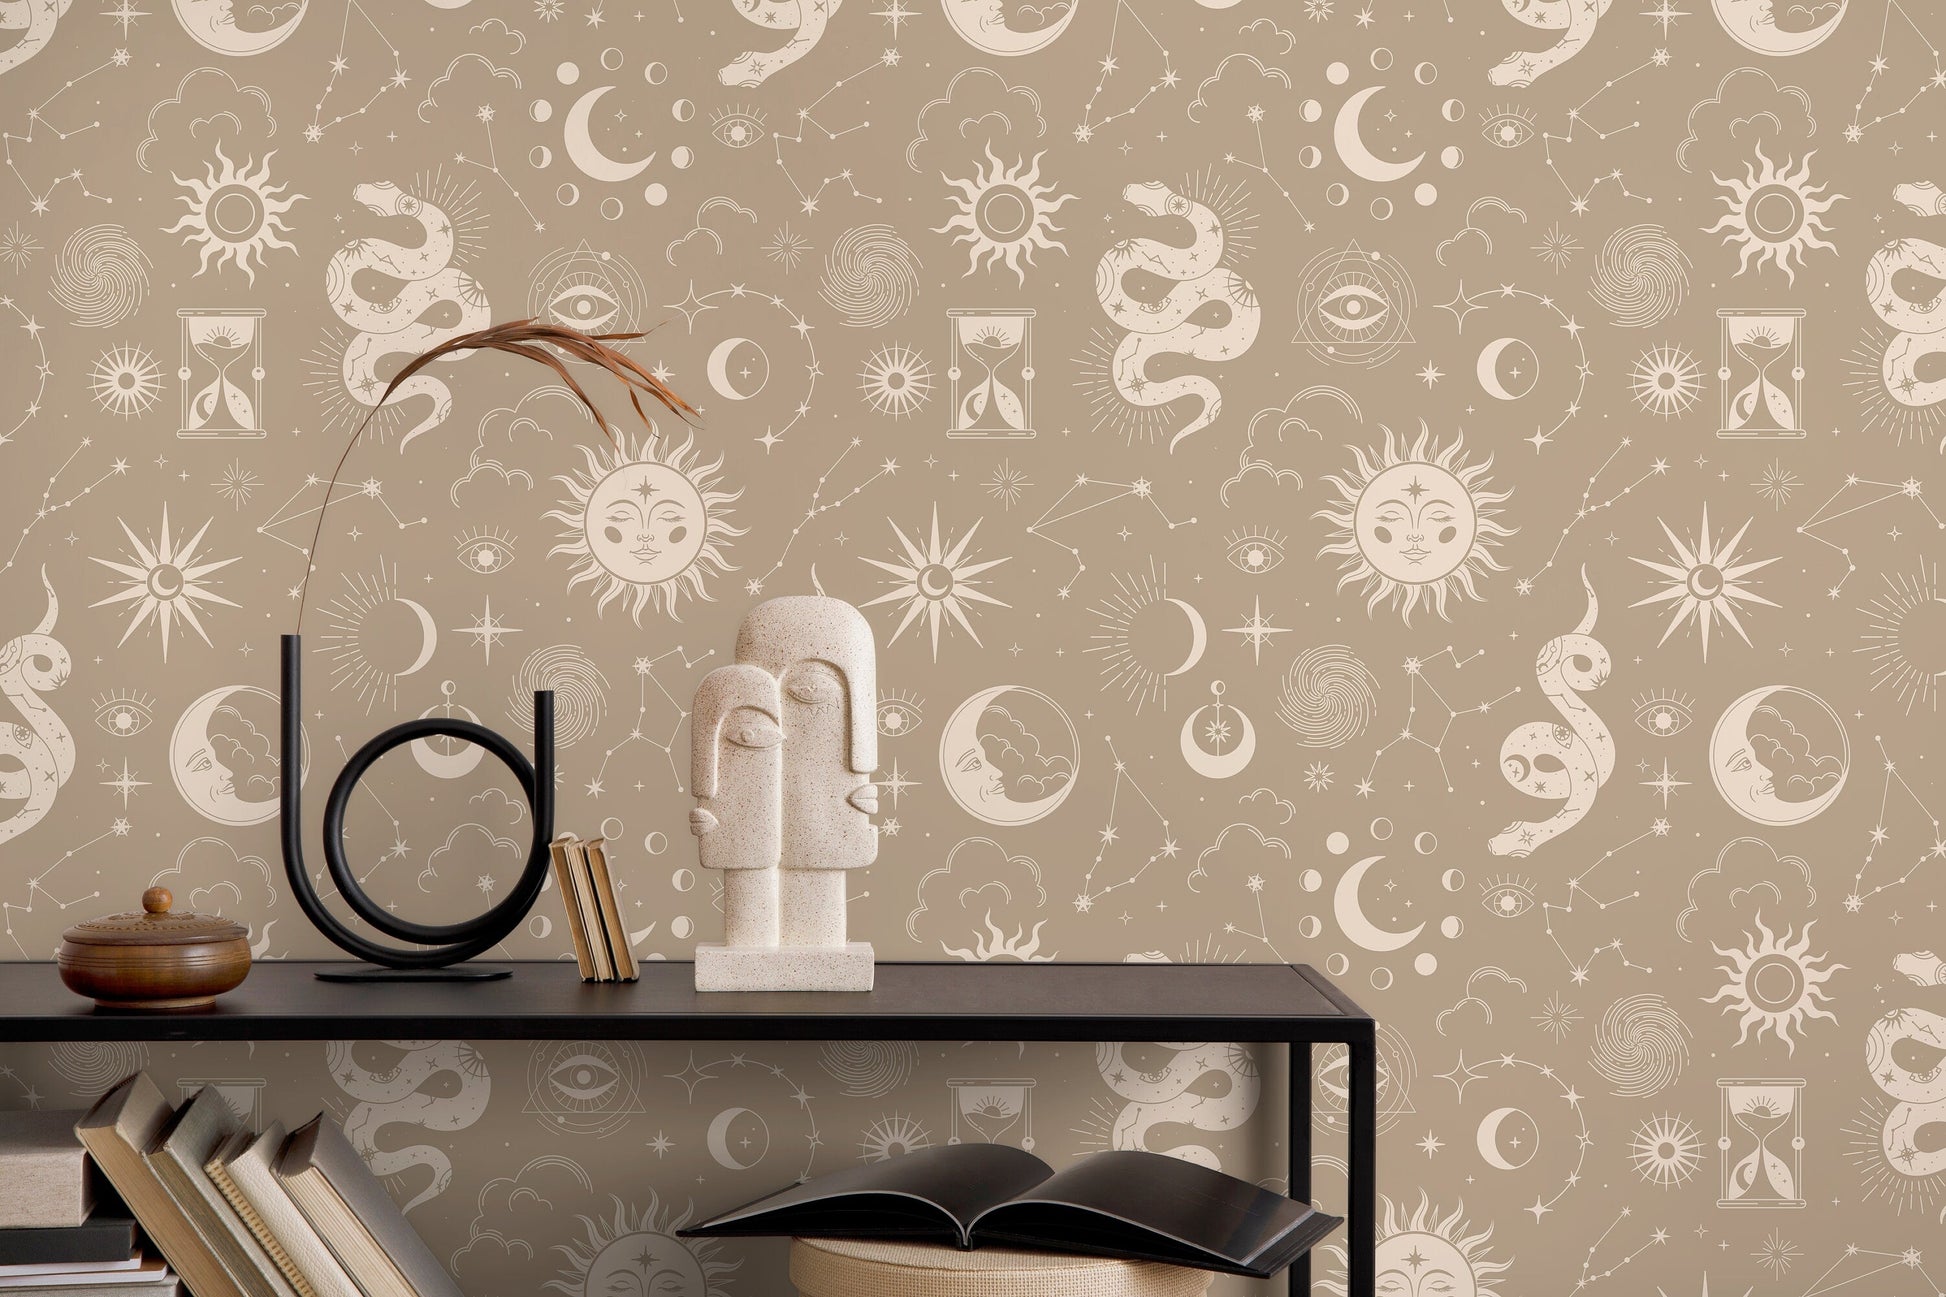 Beige Whimsical Wallpaper / Peel and Stick Wallpaper Removable Wallpaper Home Decor Wall Art Wall Decor Room Decor - D344